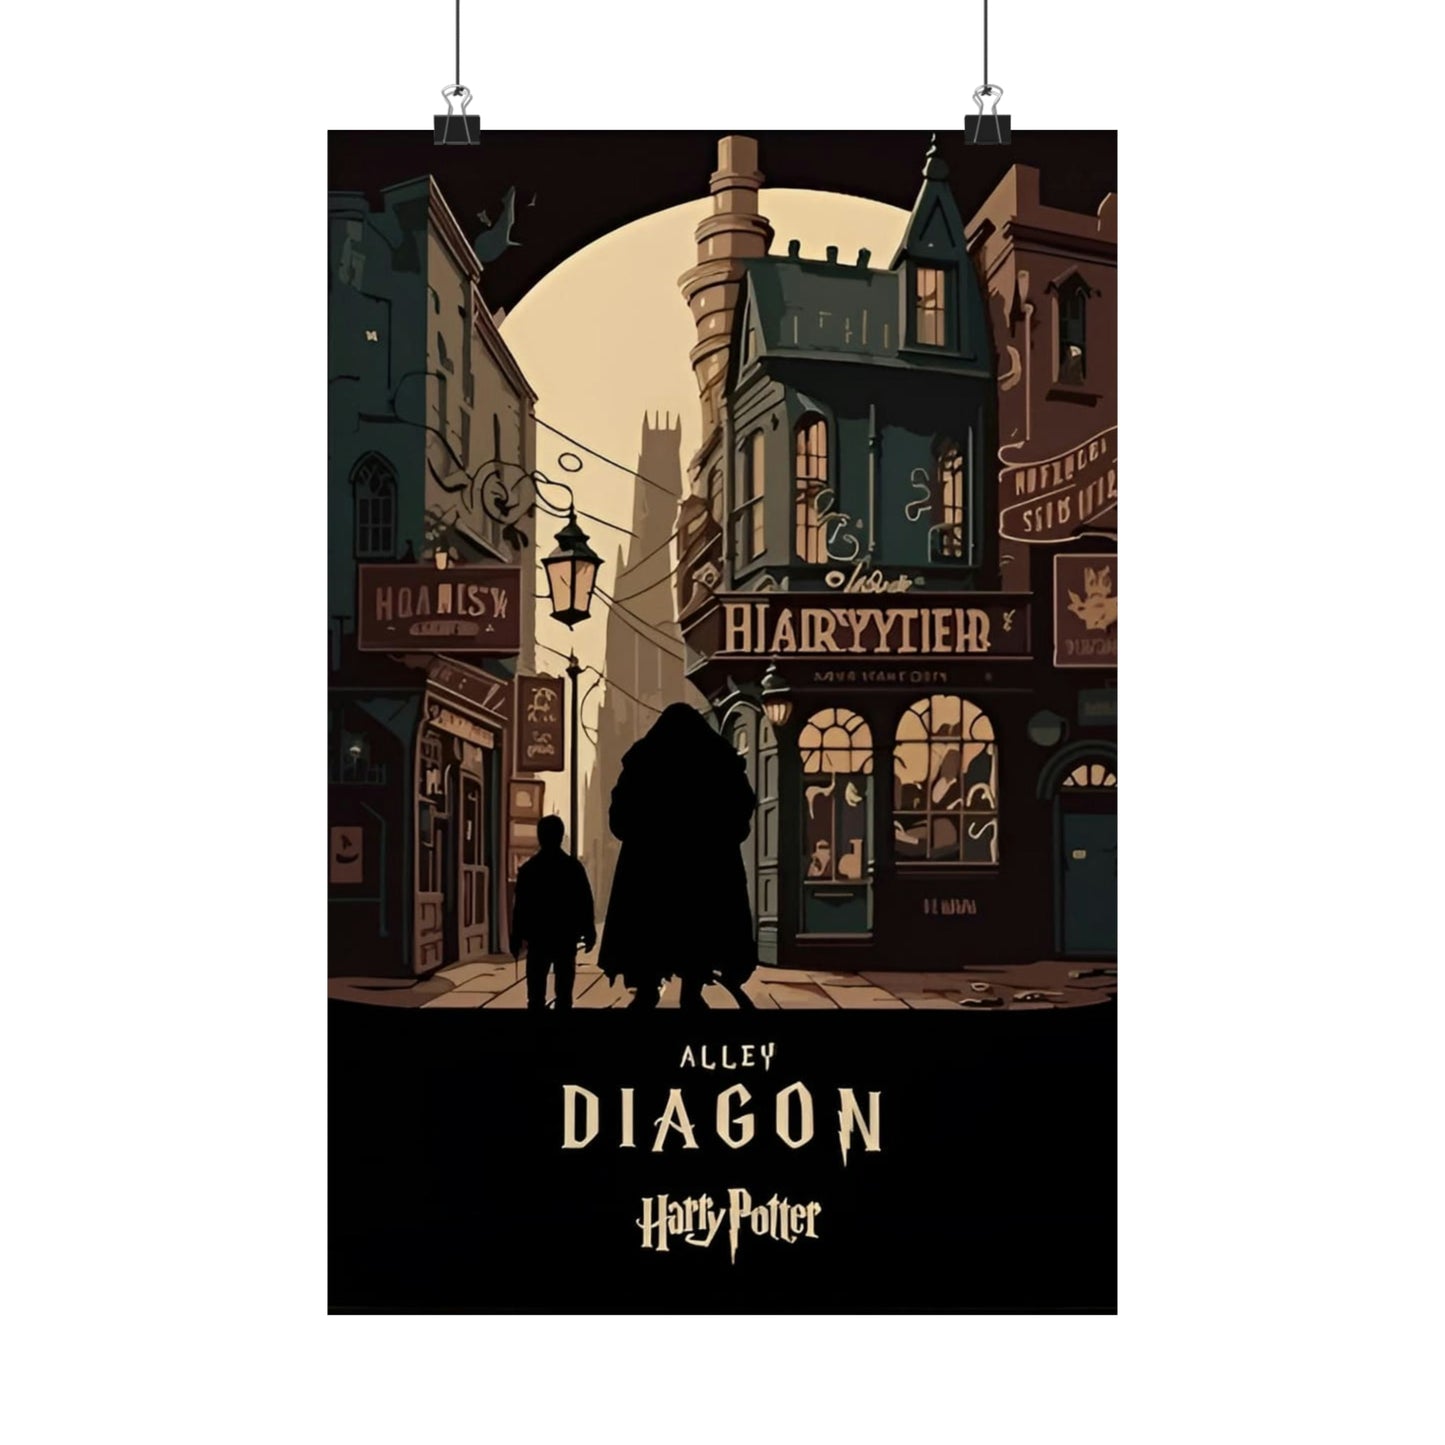 ALLEY DIAGON HARRY POTTER POSTER